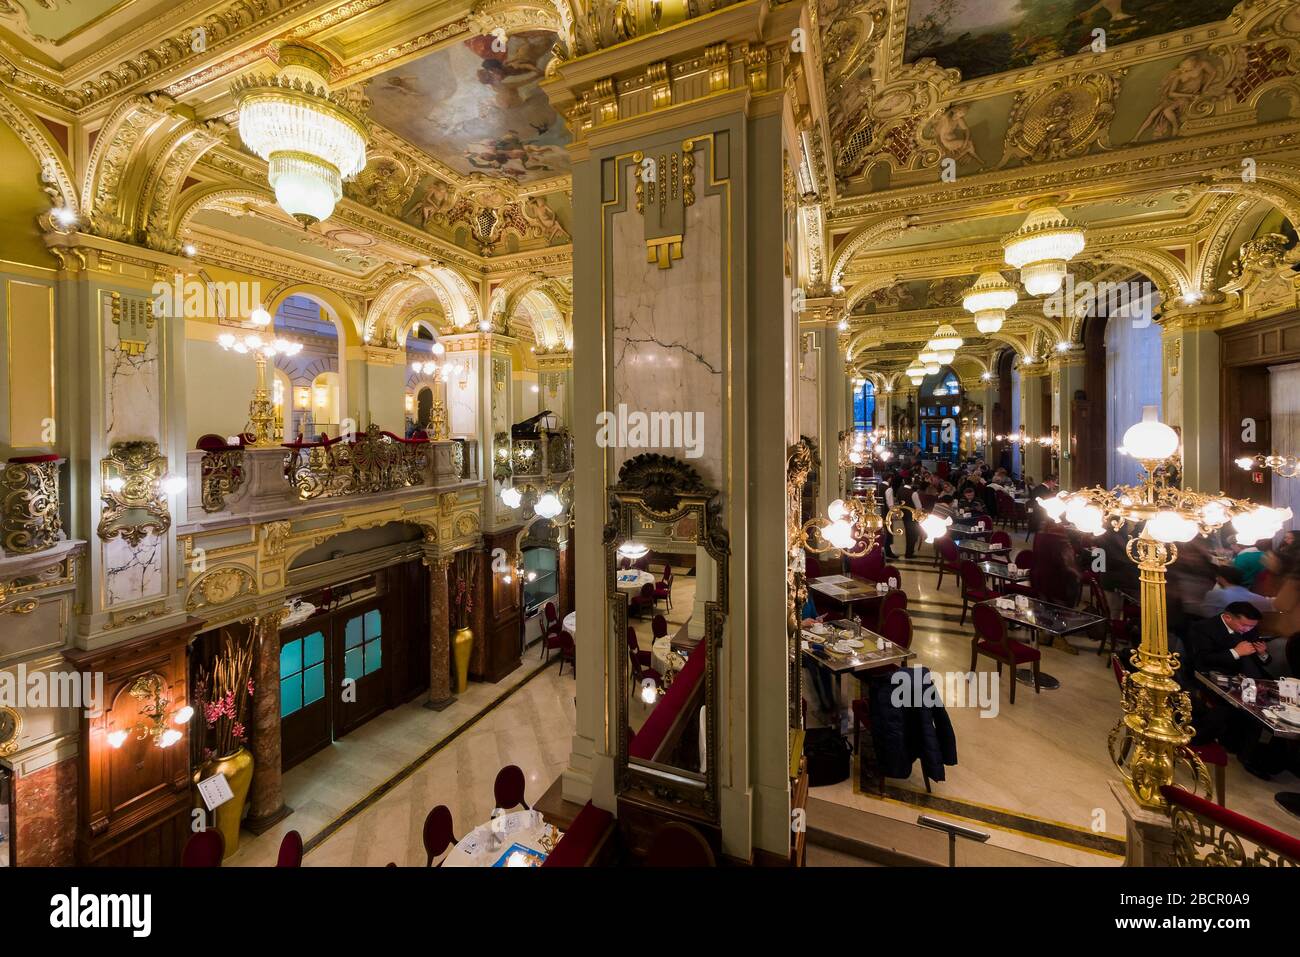 Hungary, Budapest - New York cafè, Erzsébet krt. 9-11 - At the turn of the 20th century the New York Café was the most beautiful and the most beloved Stock Photo